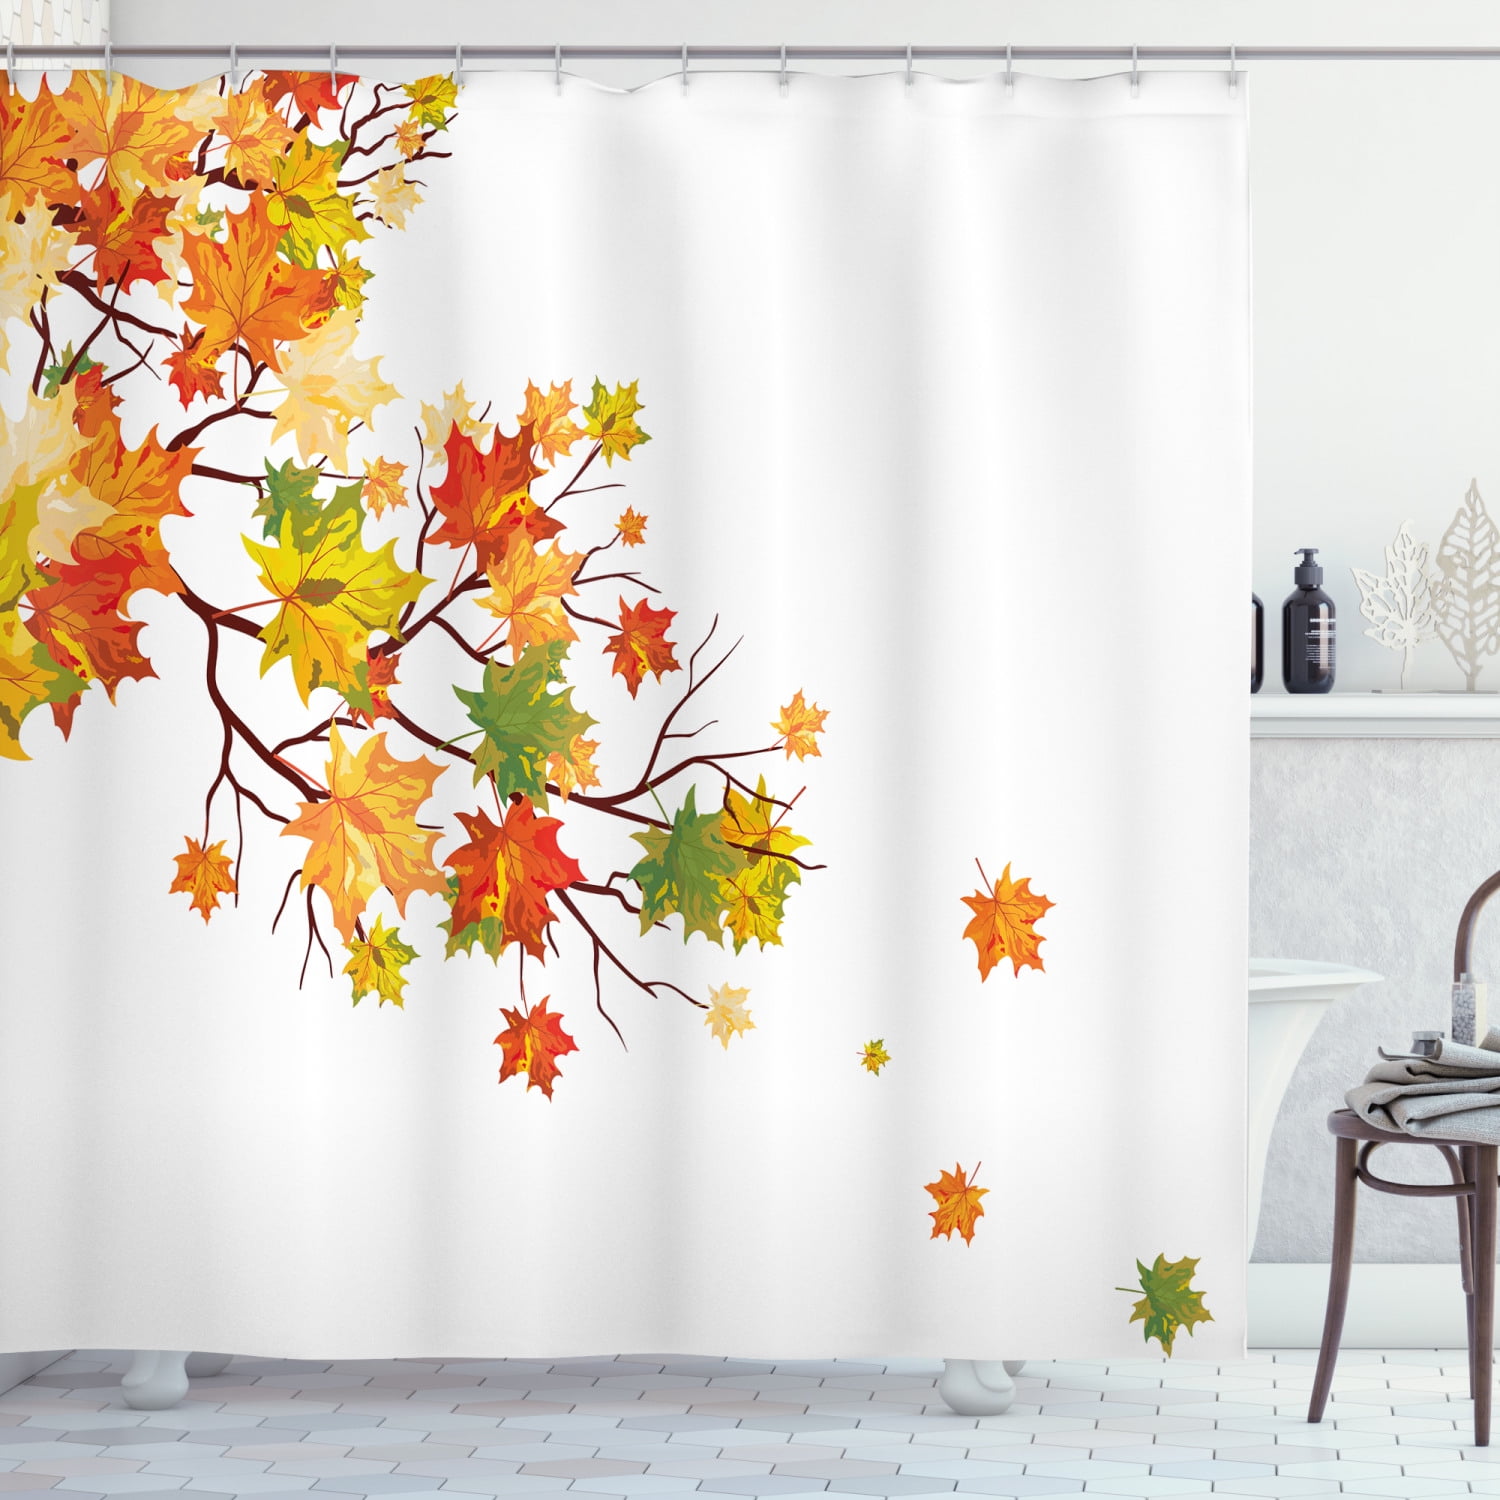 Maple Leaf Design Water-resisitant Fabric Shower Curtain Set with 12 Hooks 